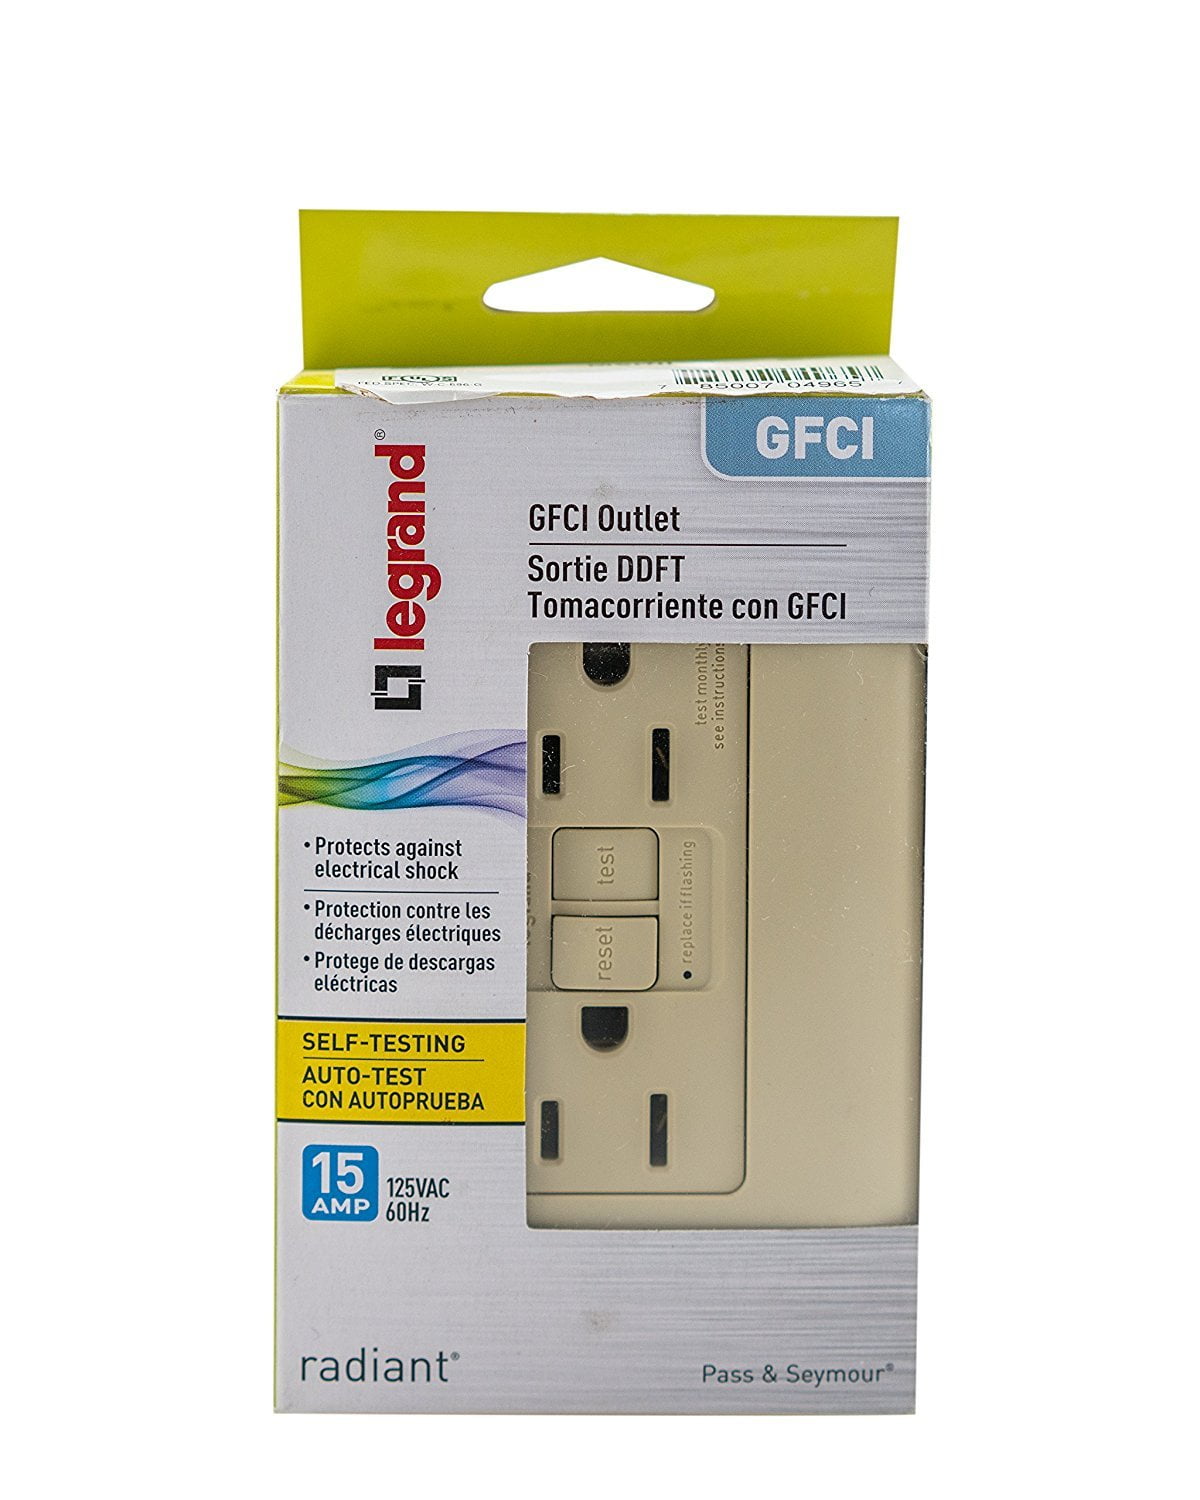 Legrand Ivory Pass & Seymour radiant 1597ICC10 15 Amp Self-Test GFCI Safety Outlet Matching Wall Plate Included Legrand-Pass & Seymour